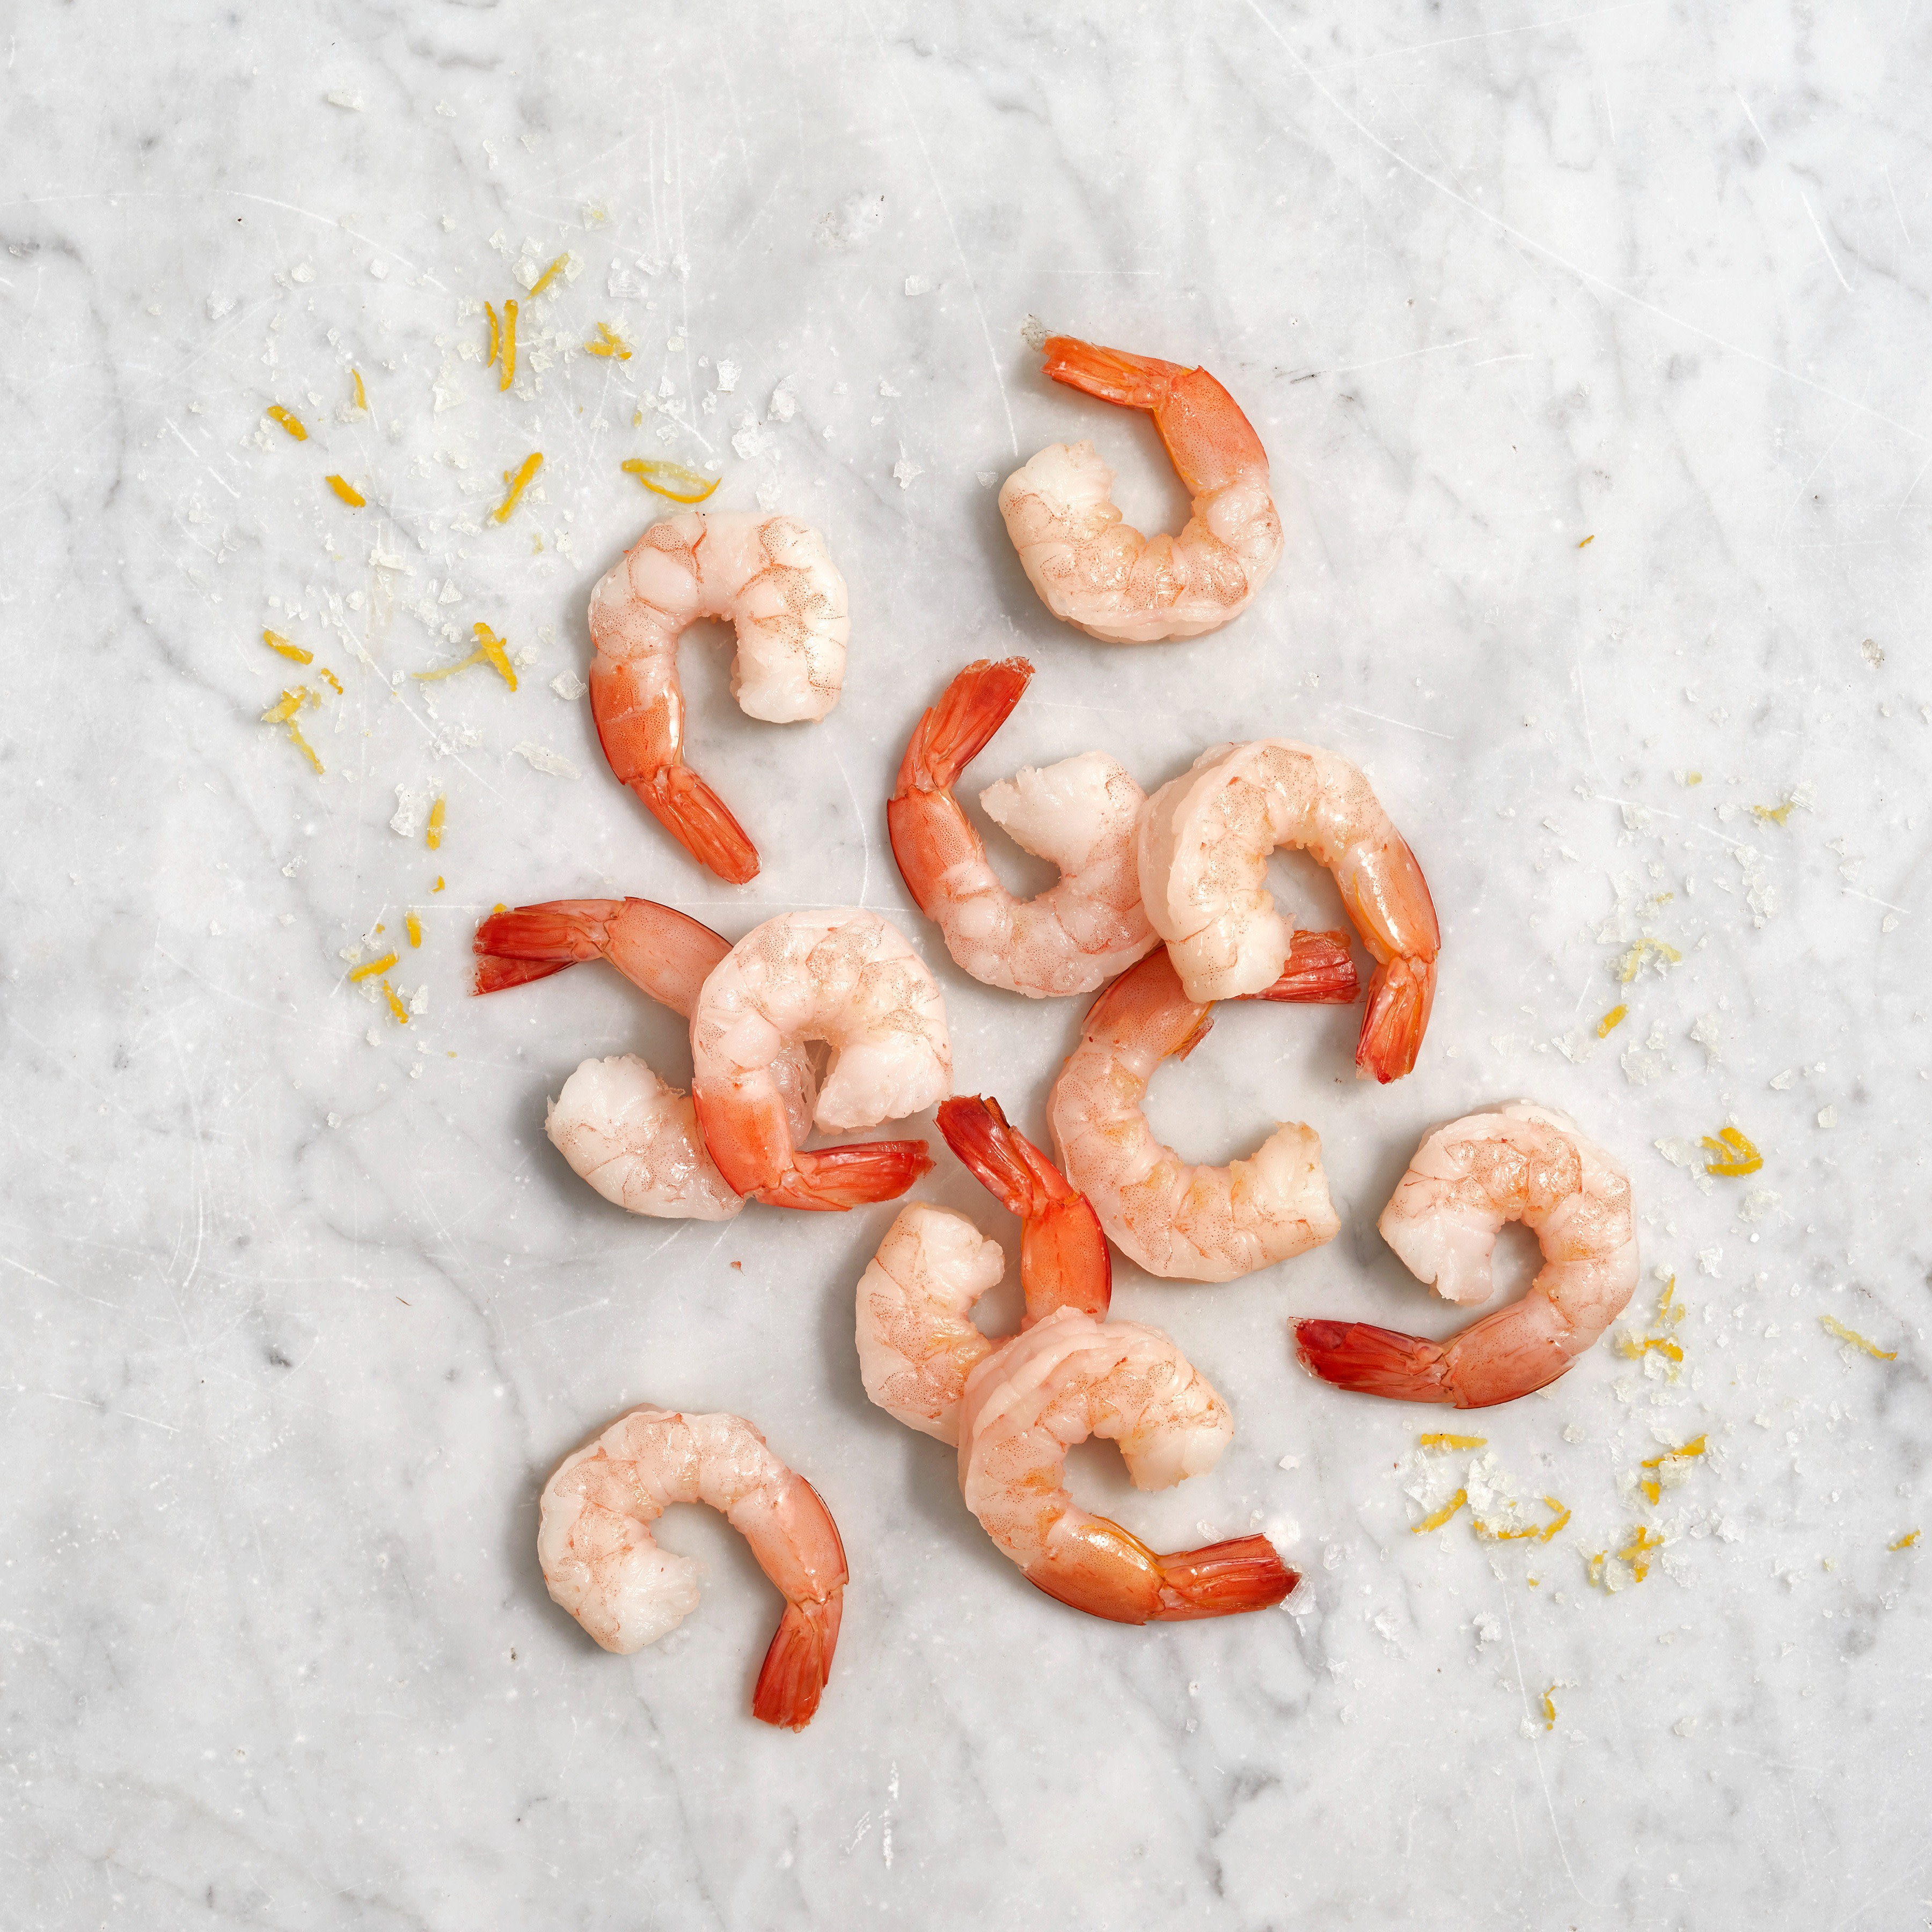 6016 WF Raw Fully Cooked Peeled & Deveined Large Shrimp Tail On Seafood